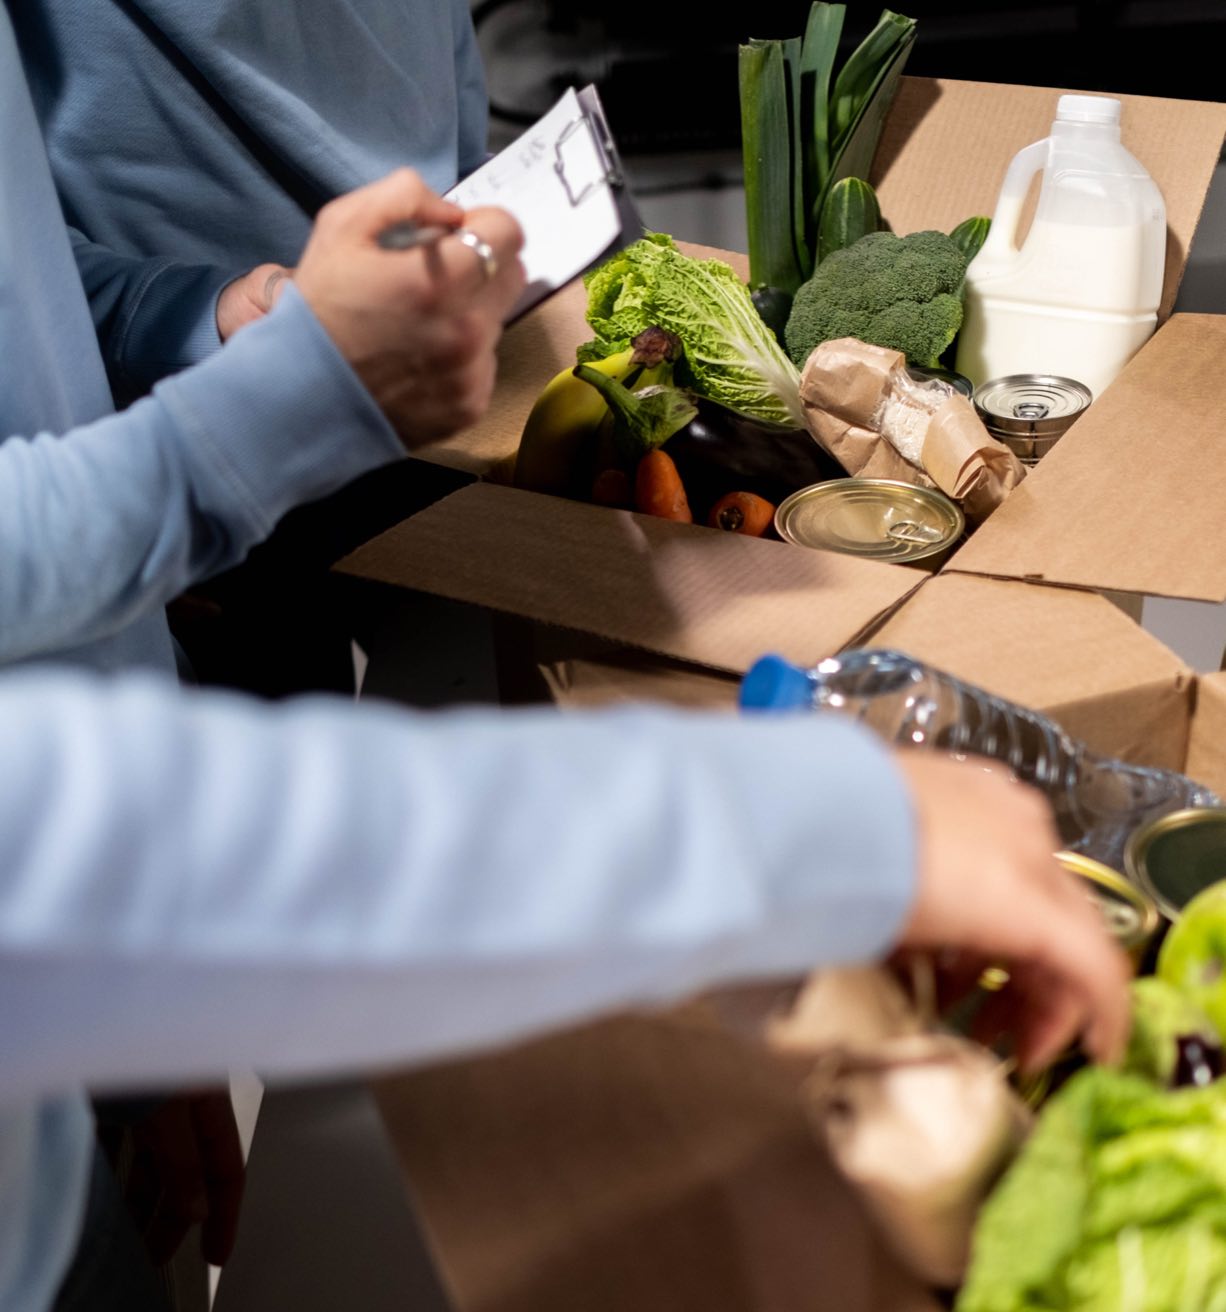 People sorting through fresh food in boxes.